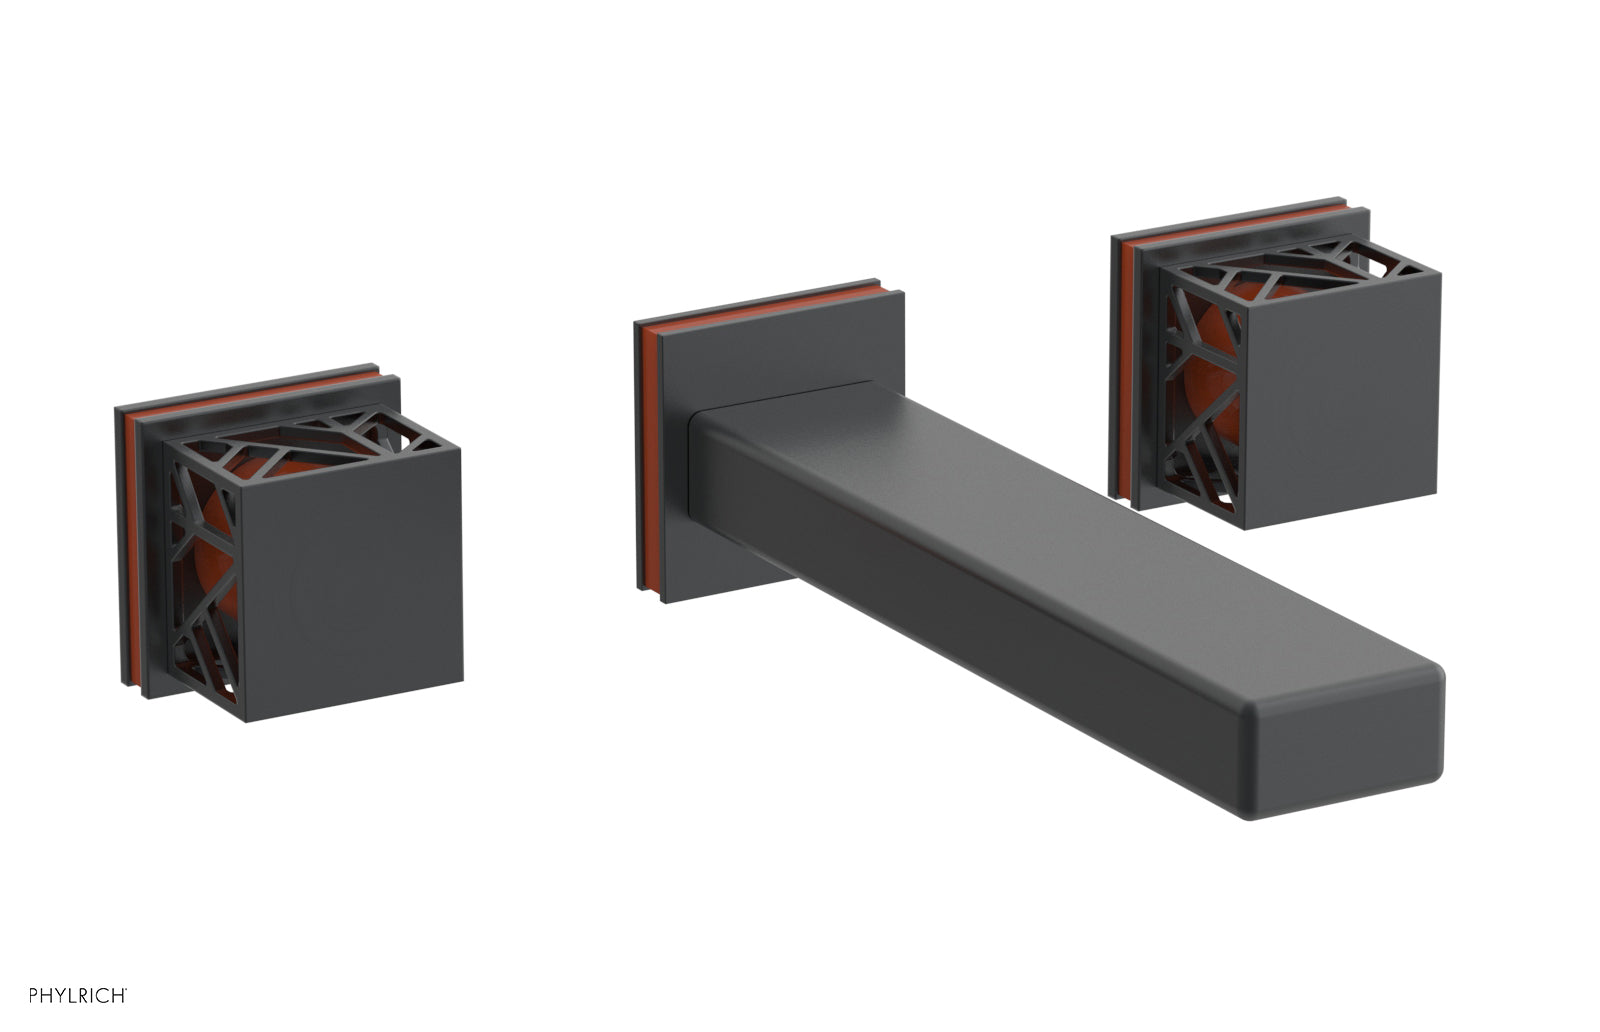 Phylrich JOLIE Wall Tub Set - Square Handles with "Orange" Accents